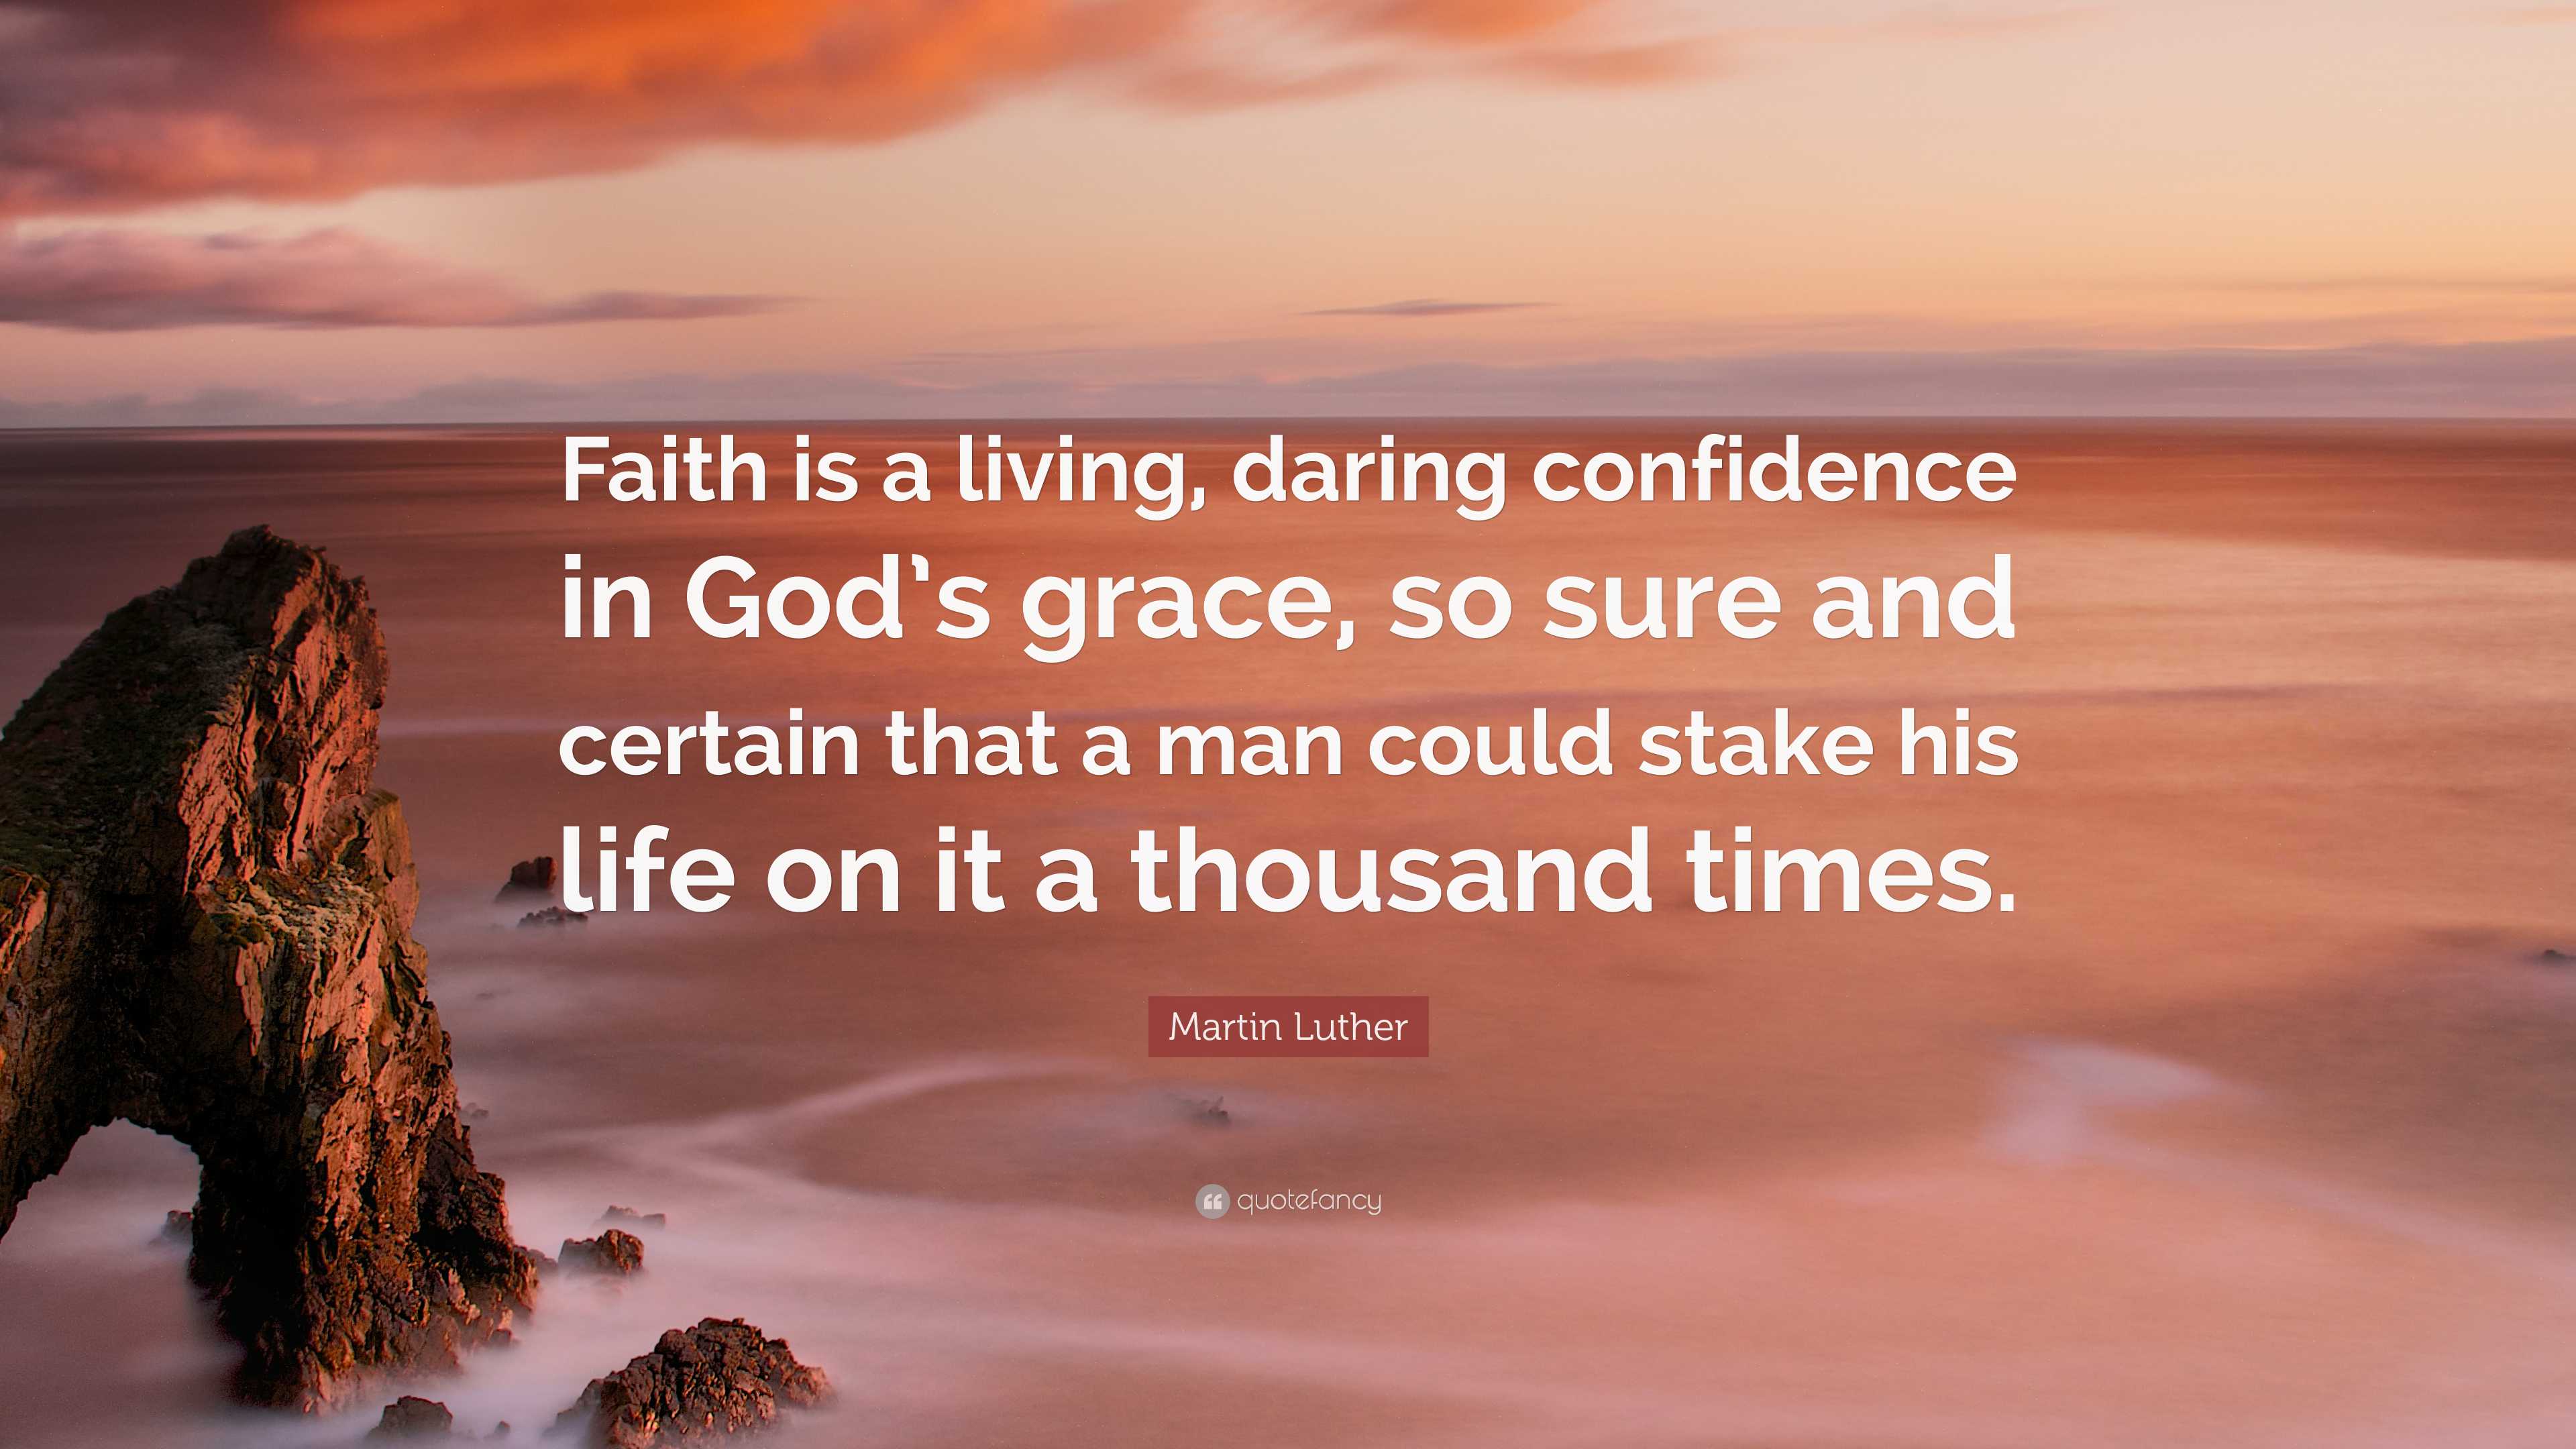 Martin Luther Quote: “Faith is a living, daring confidence in God’s ...